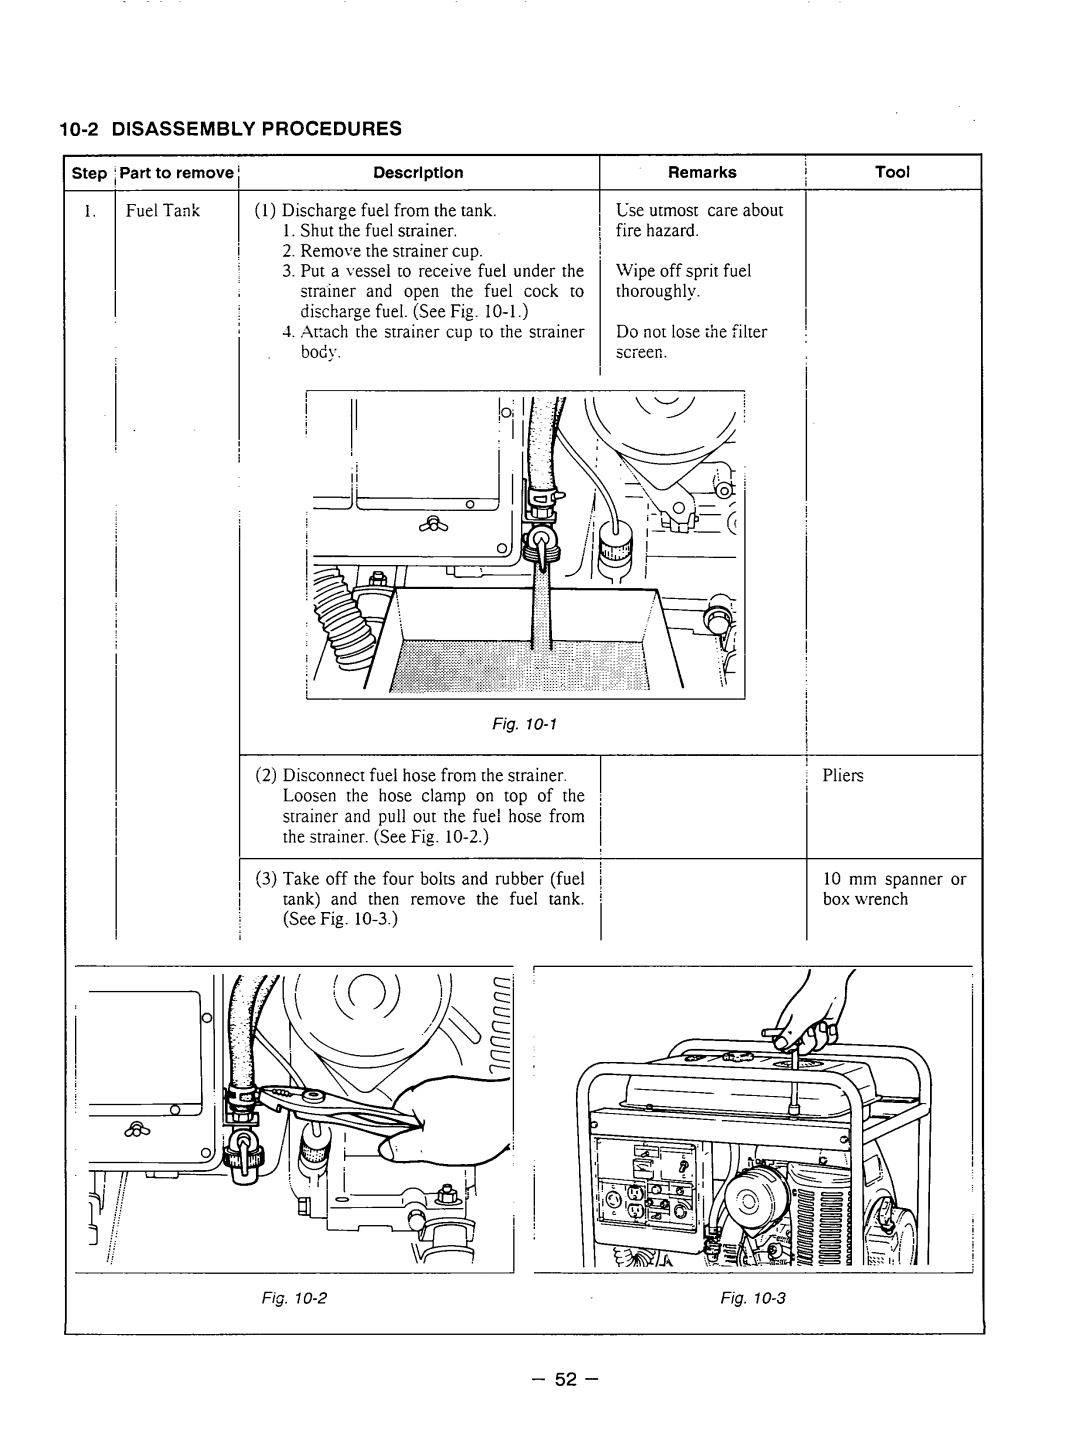 Subaru Robin Power Products RGX3510 manual Disassembly Procedures 